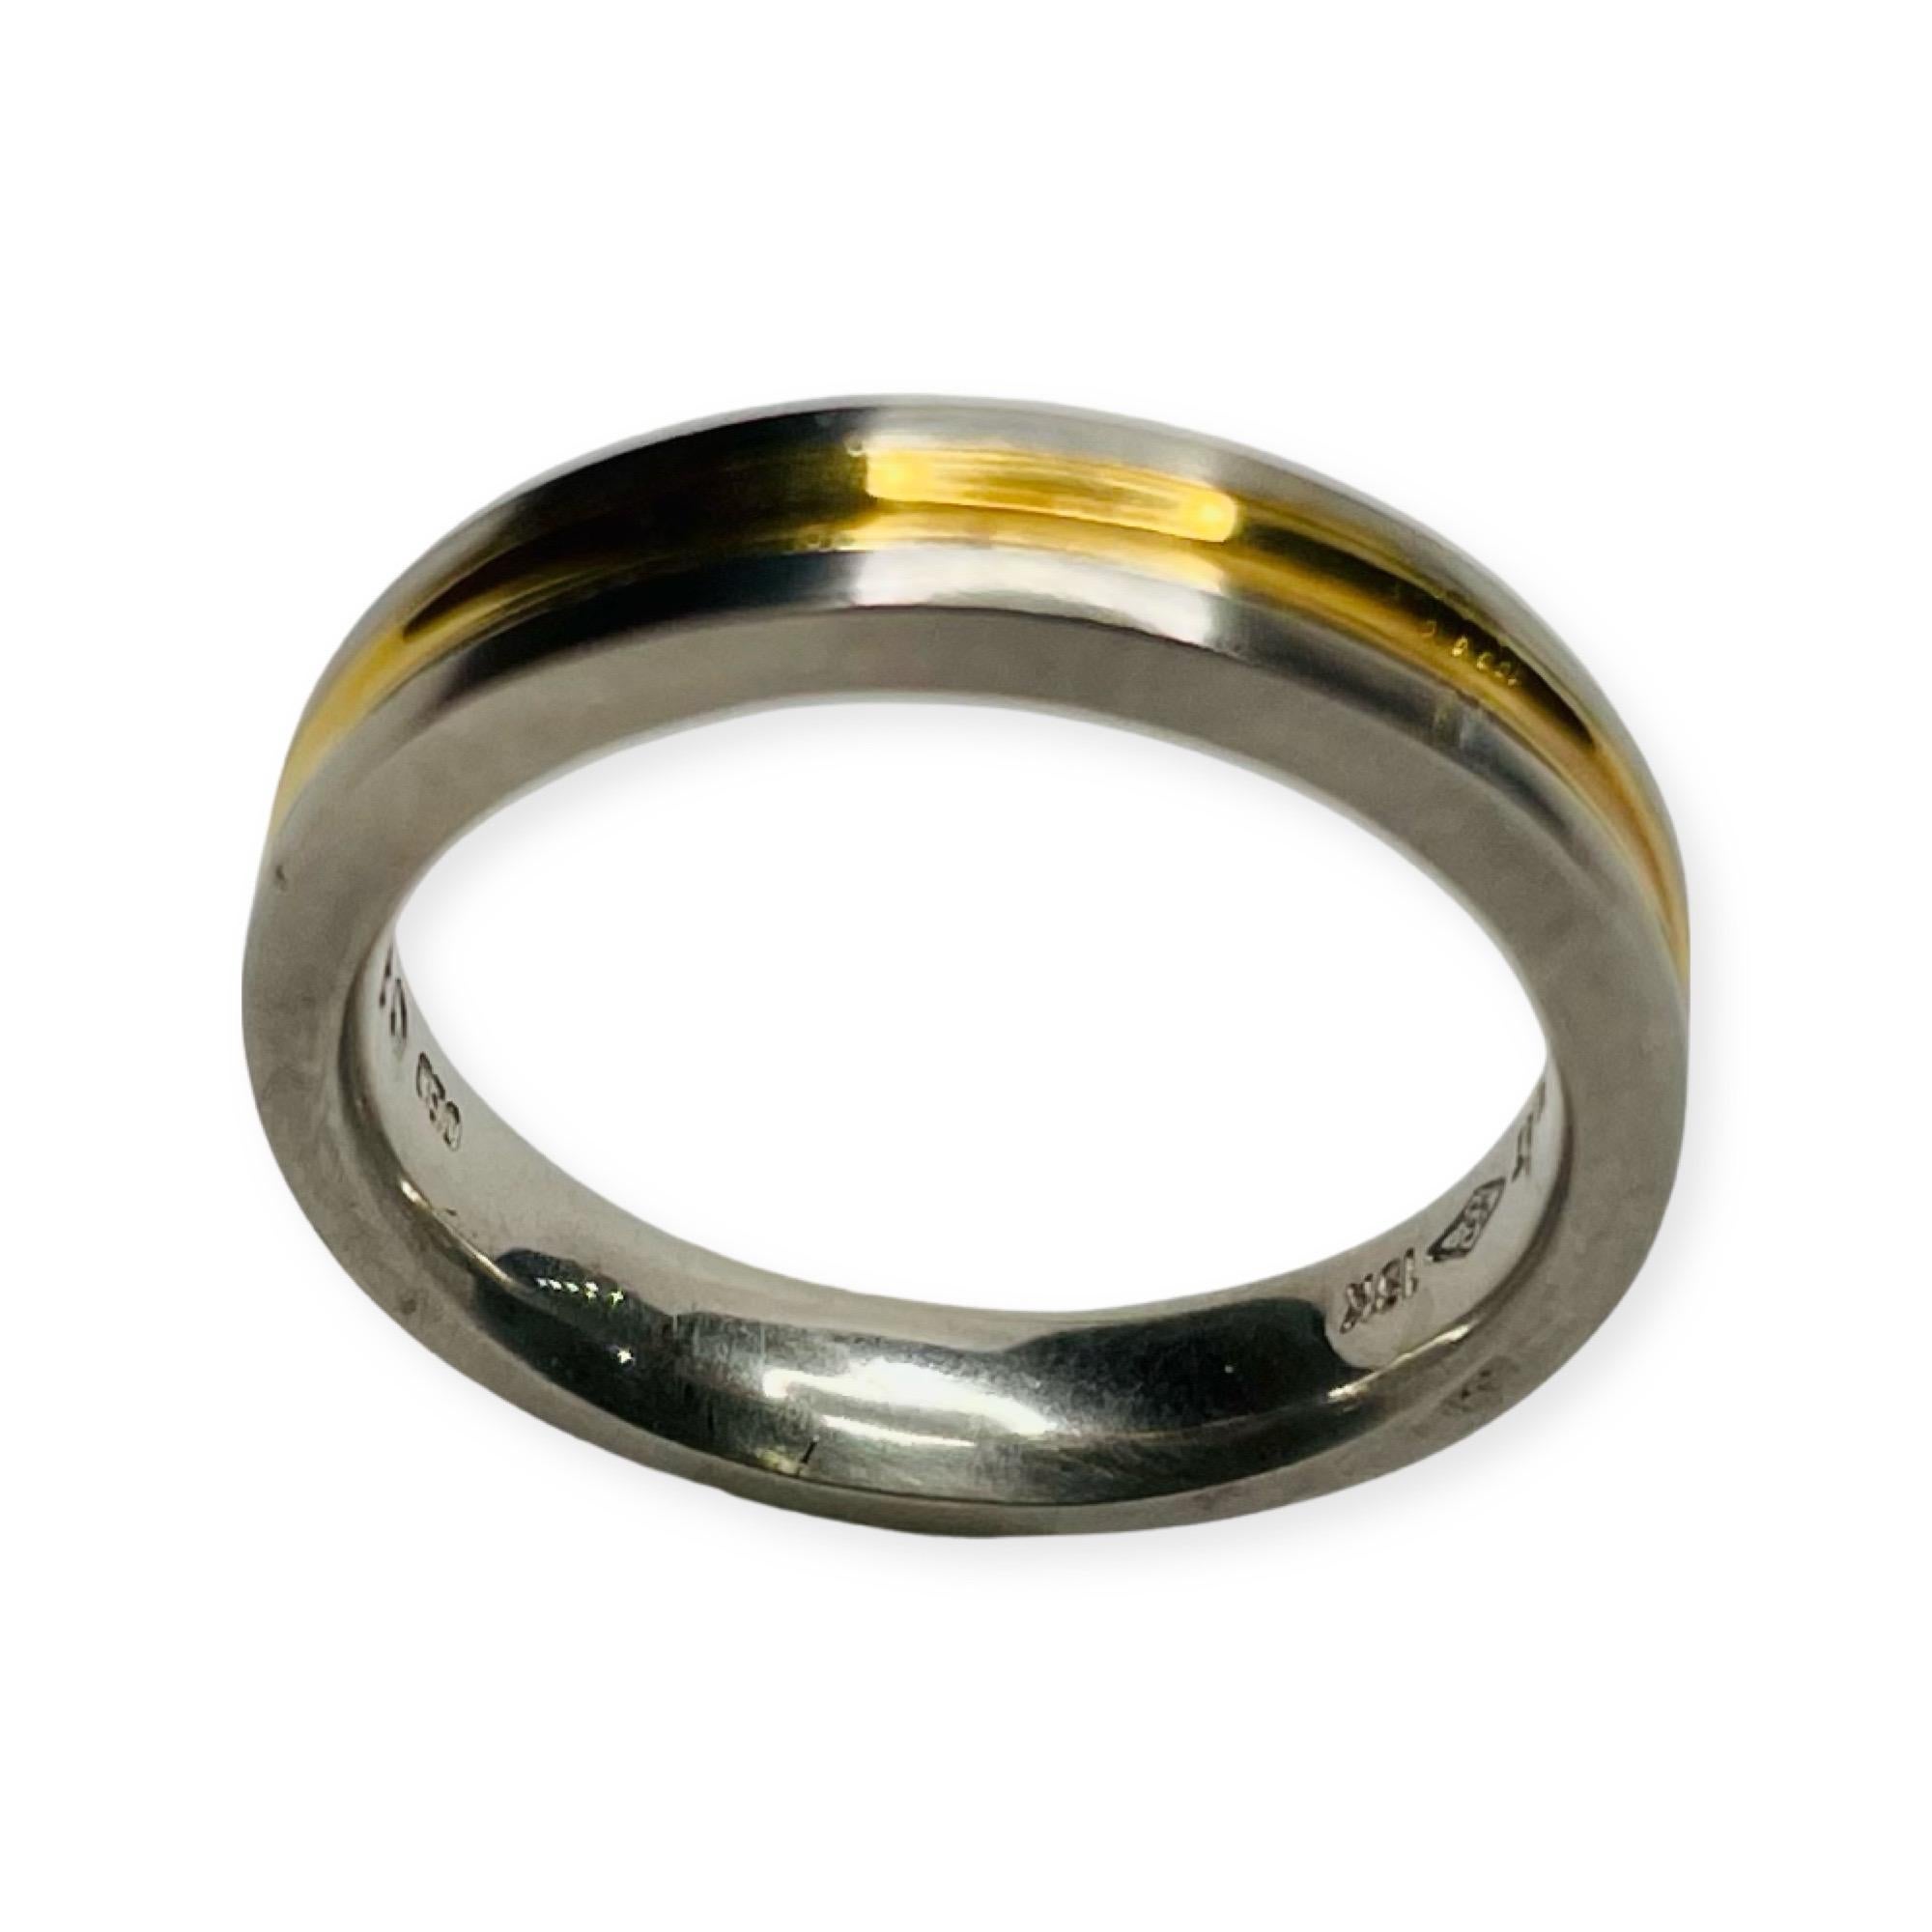 Rudolf Erdel Platinum & 18K Yellow Wedding Band. It is platinum with an 18K Yellow gold center. It is 3.88 mm at the top and 3.83 mm at the bottom of the shank.  It is Finger size 6 but can be sized for an additional charge. It has a high polish and